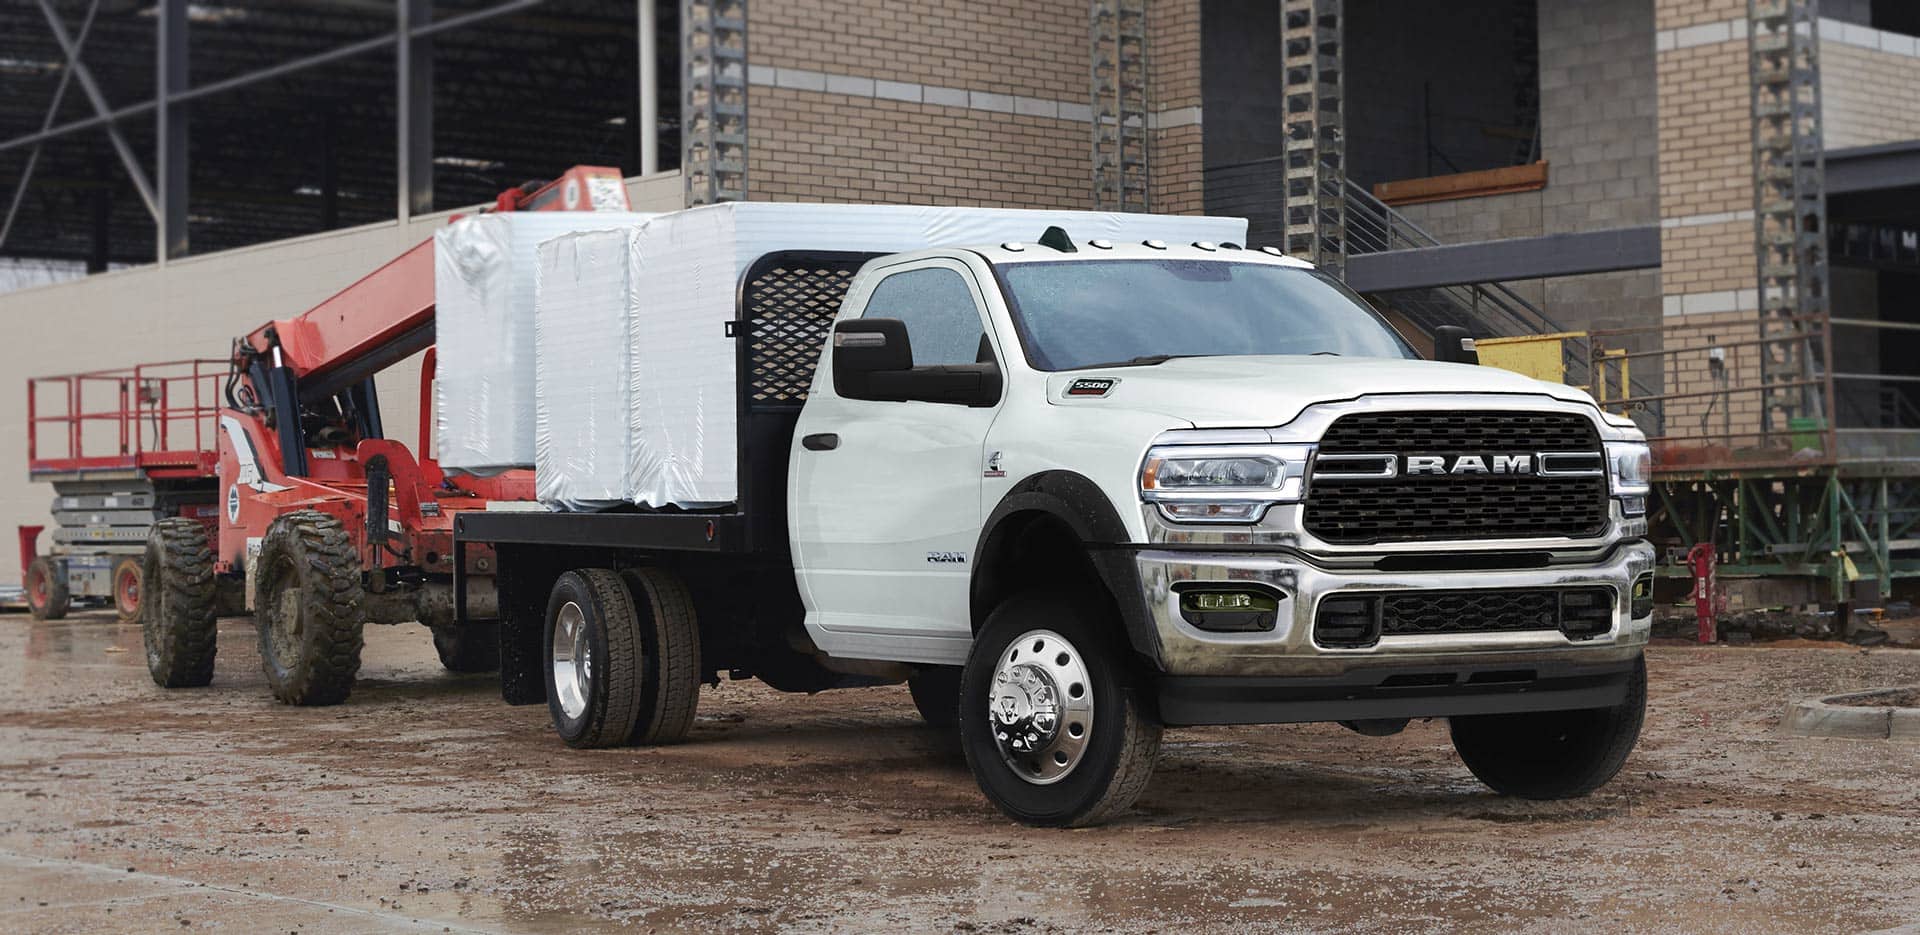 Display A 2023 Ram Chassis Cab with a platform upfit loaded with building materials, parked at a commercial construction site.